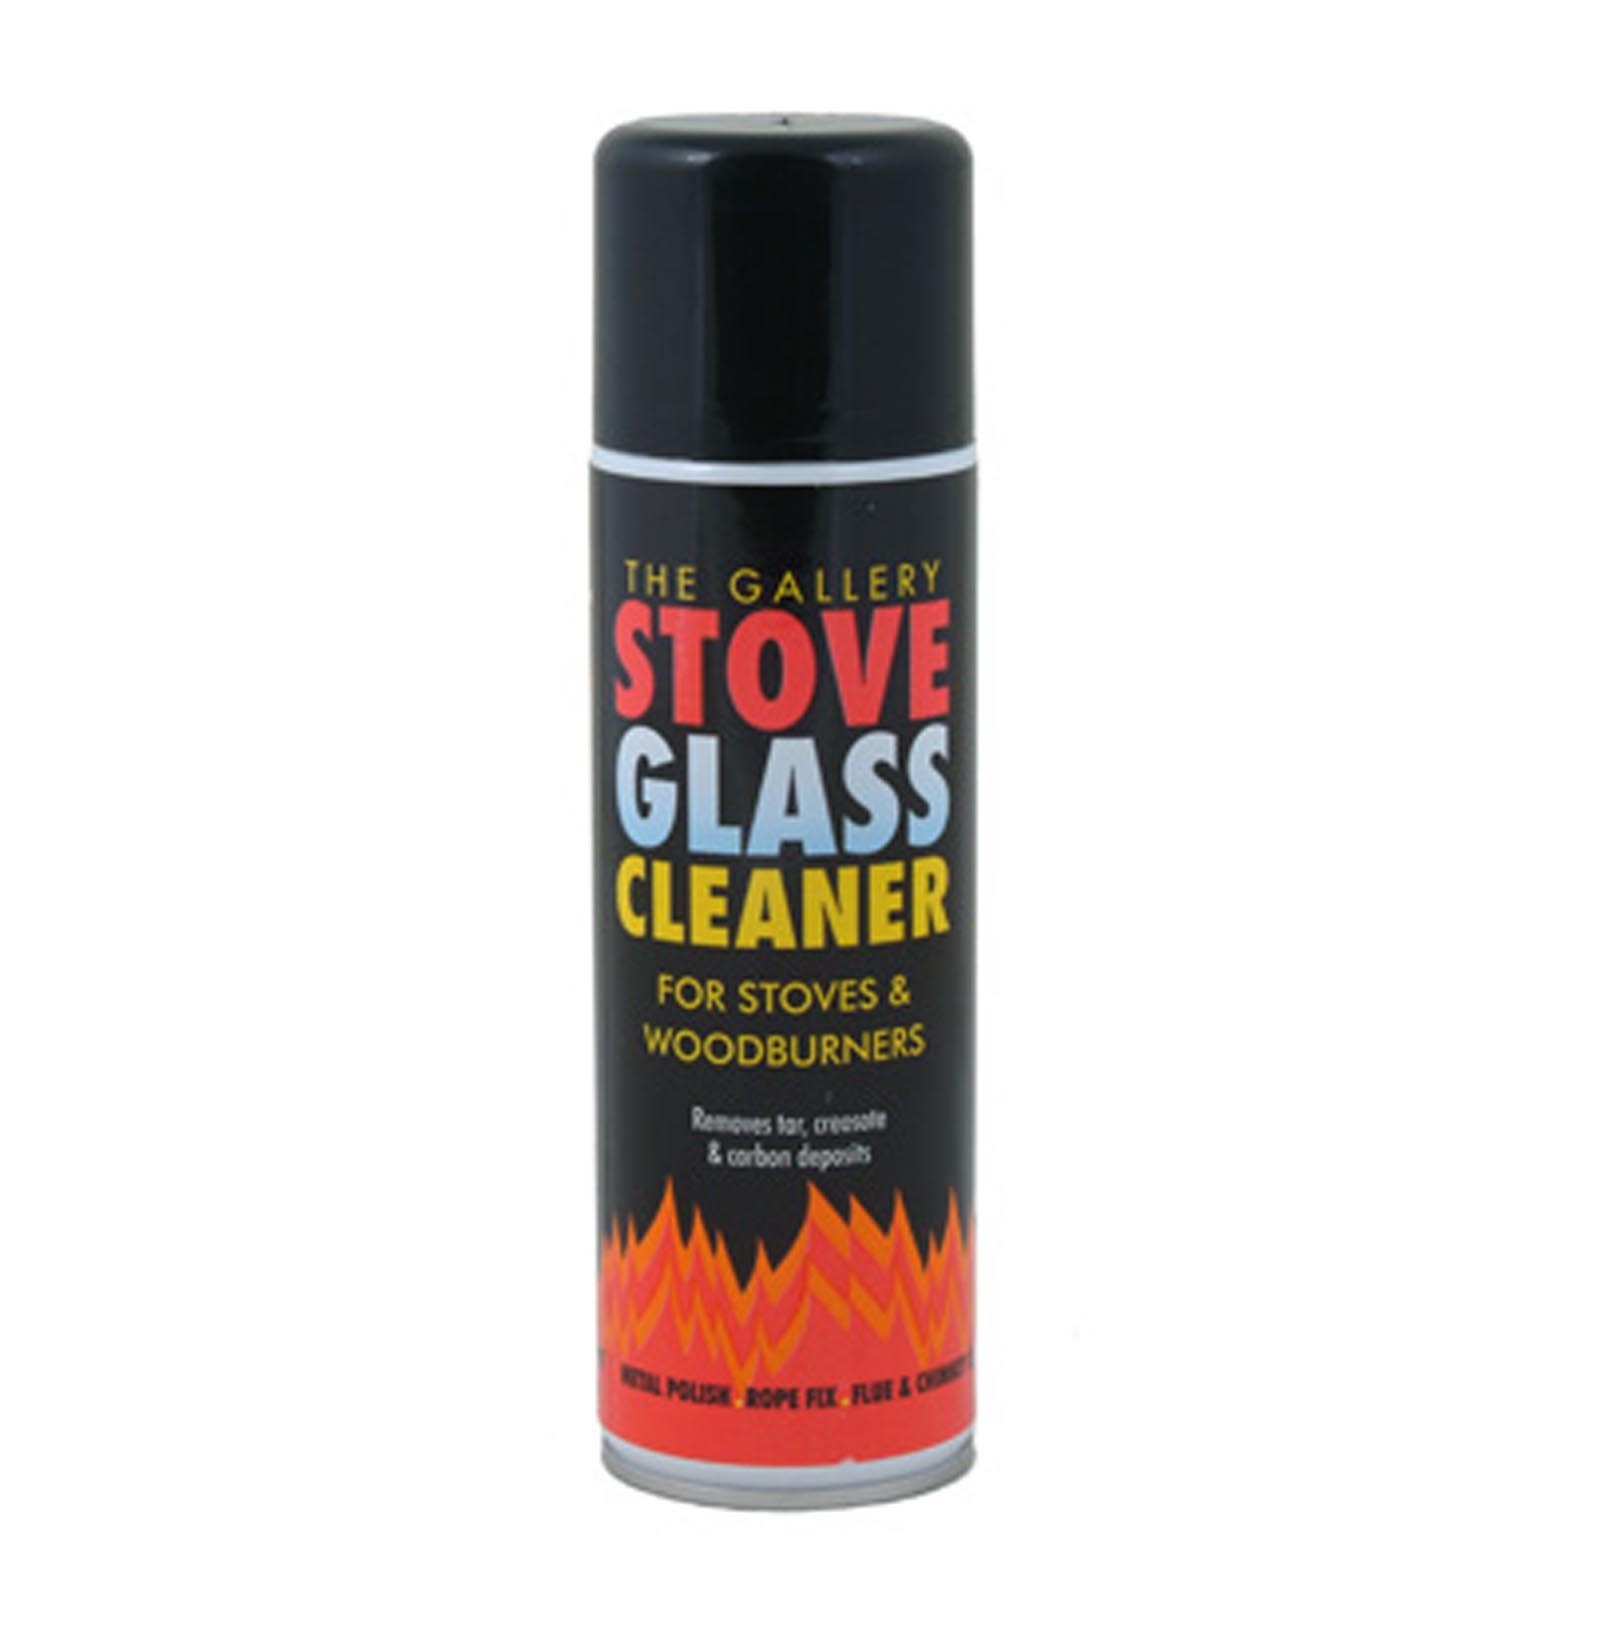 The Gallery Stove Glass Cleaner